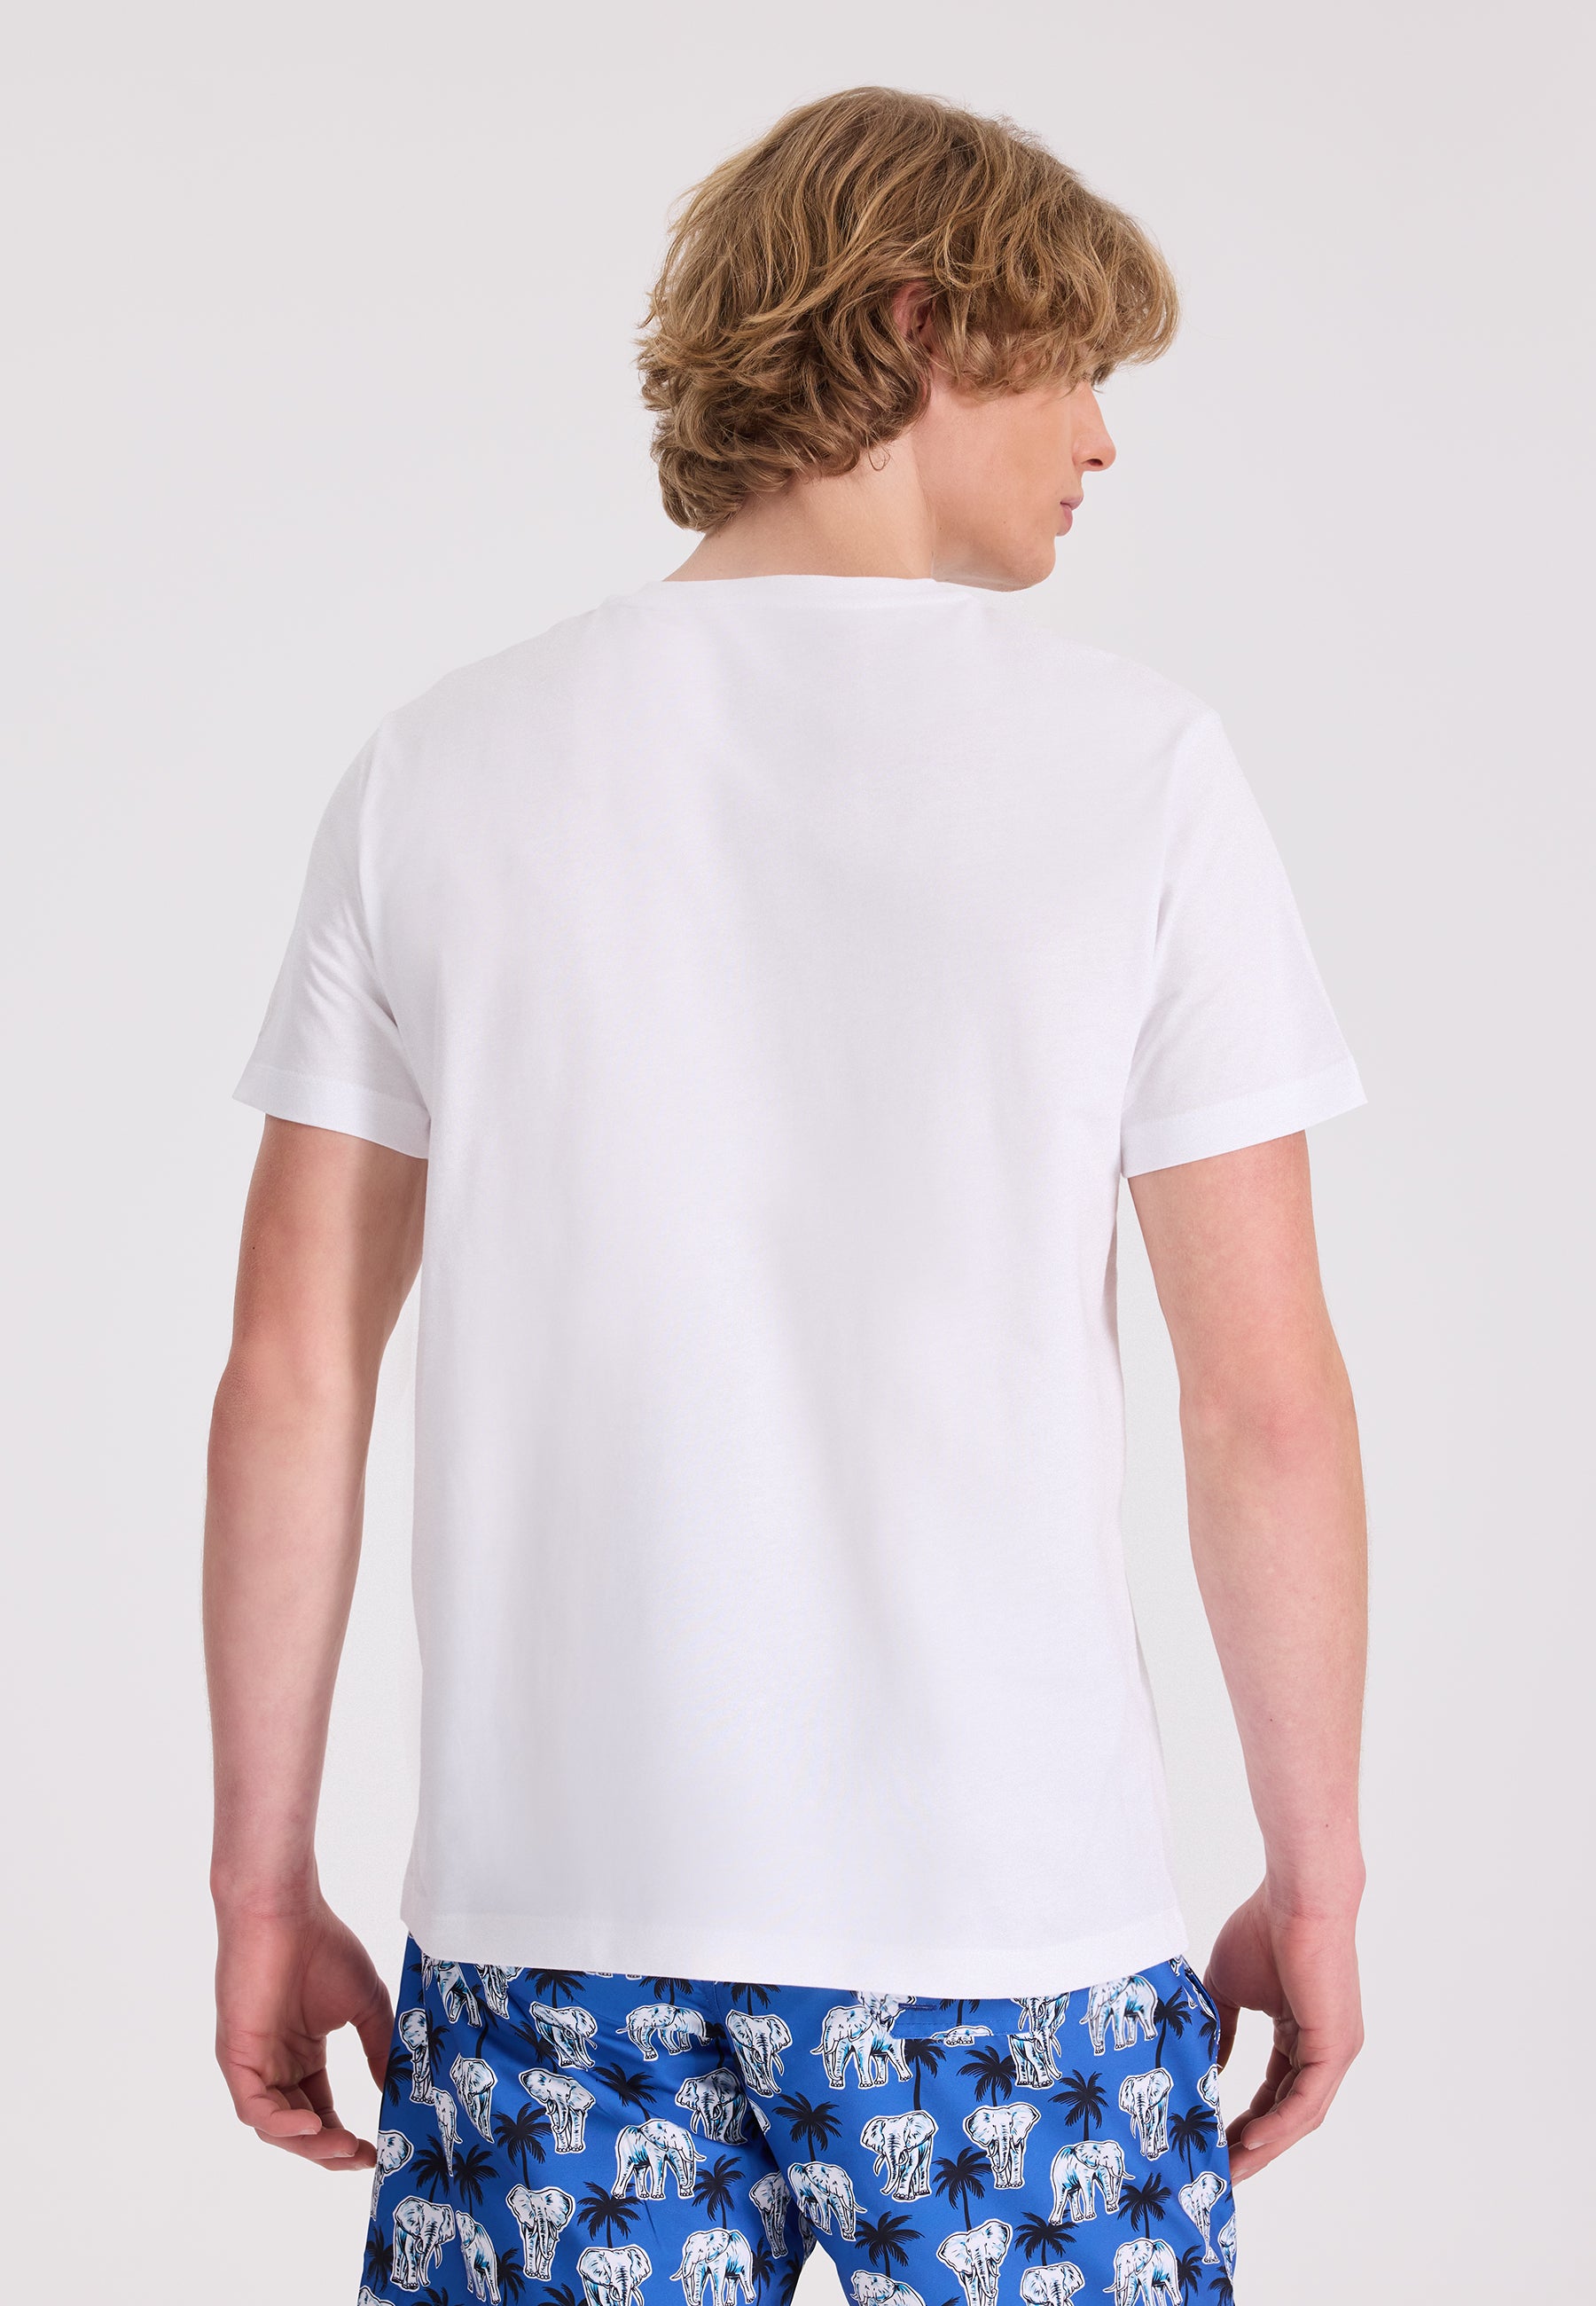 WMCHEST ELEPHANT TEE in White